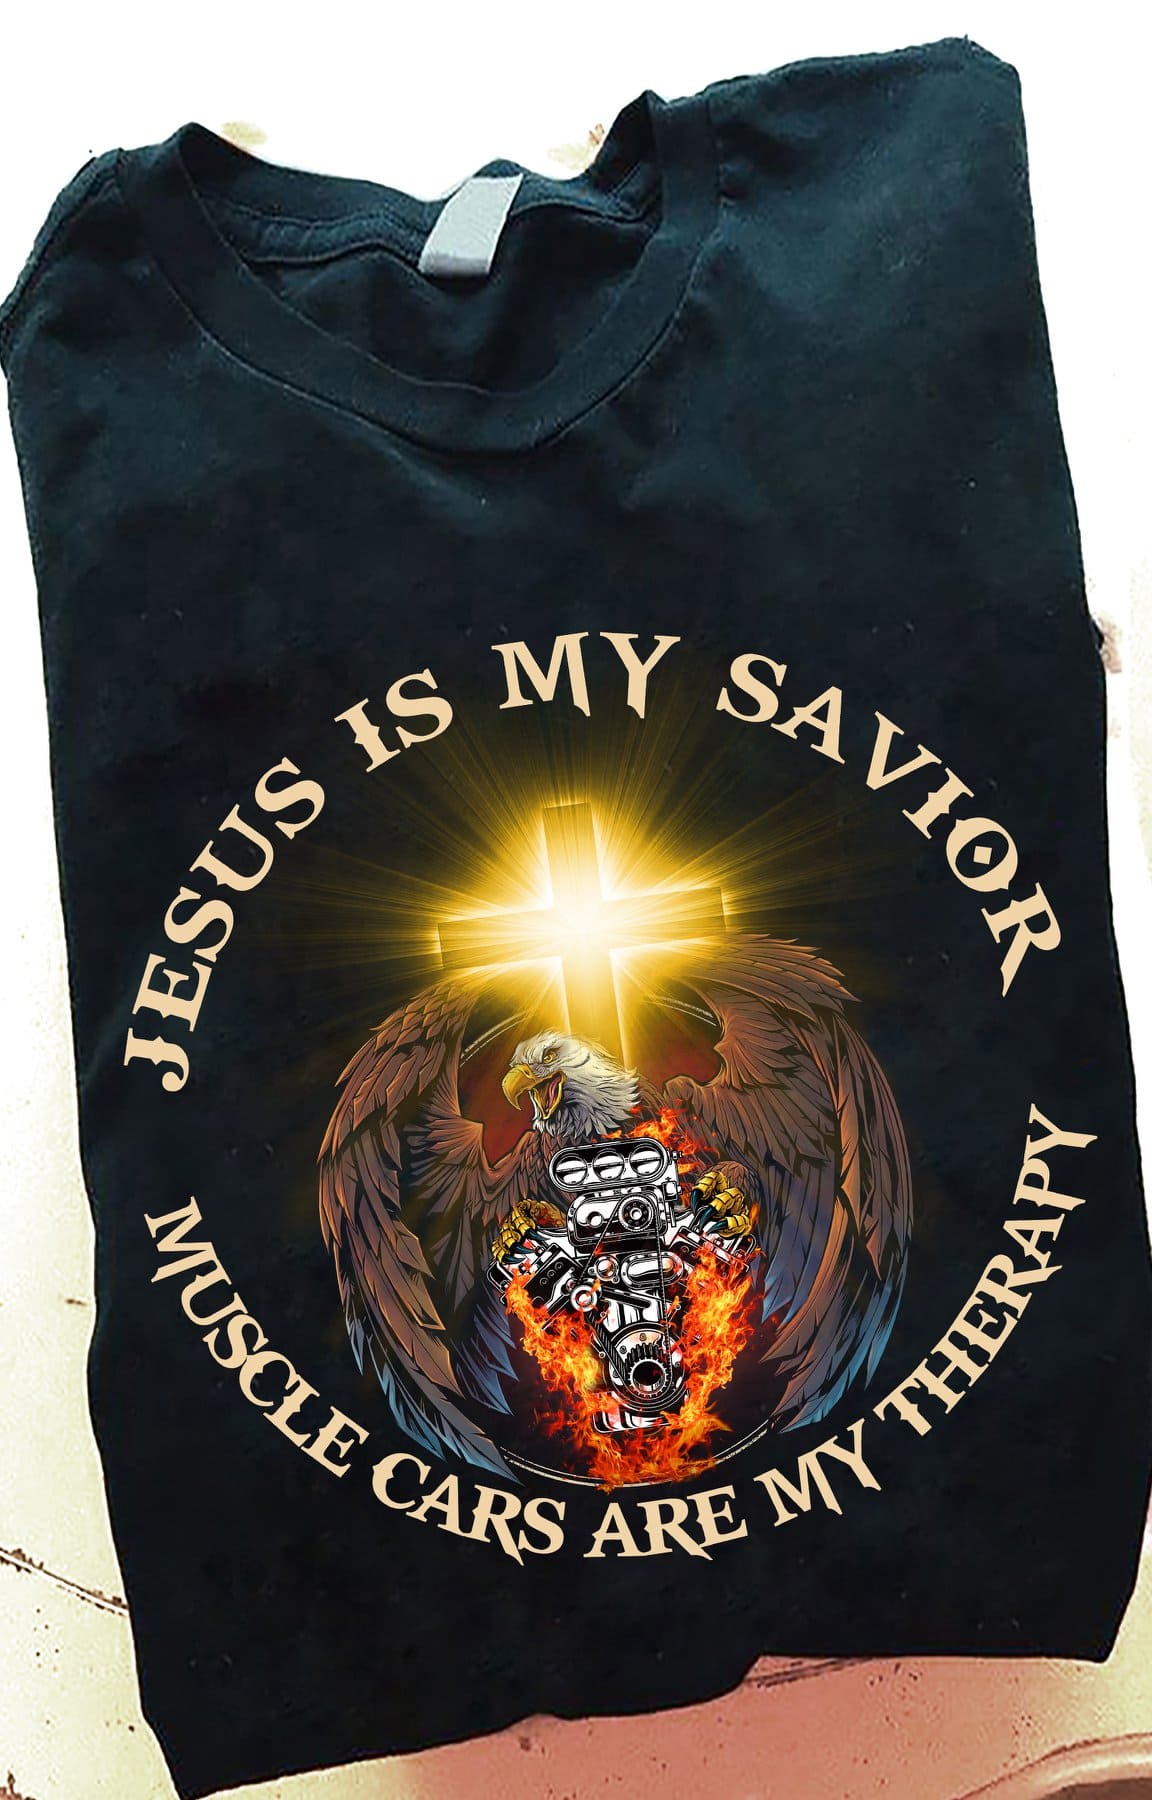 Jesus is my savior, muscles are my therapy - Eagle and engine, muscle car collection